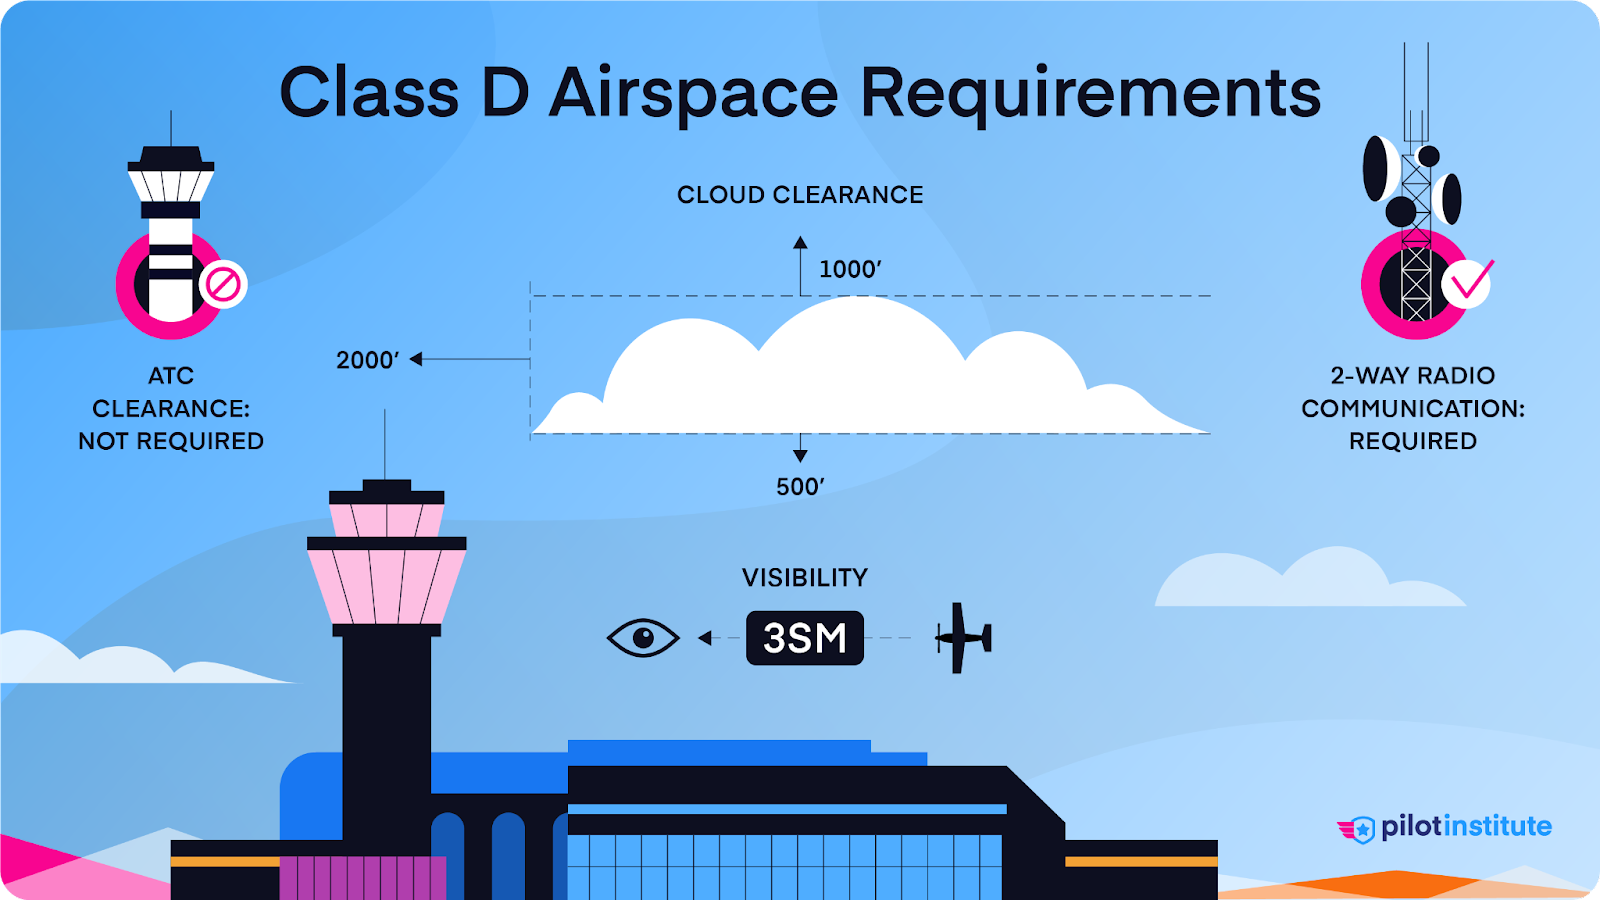 Class D Airspace Requirements infographic.